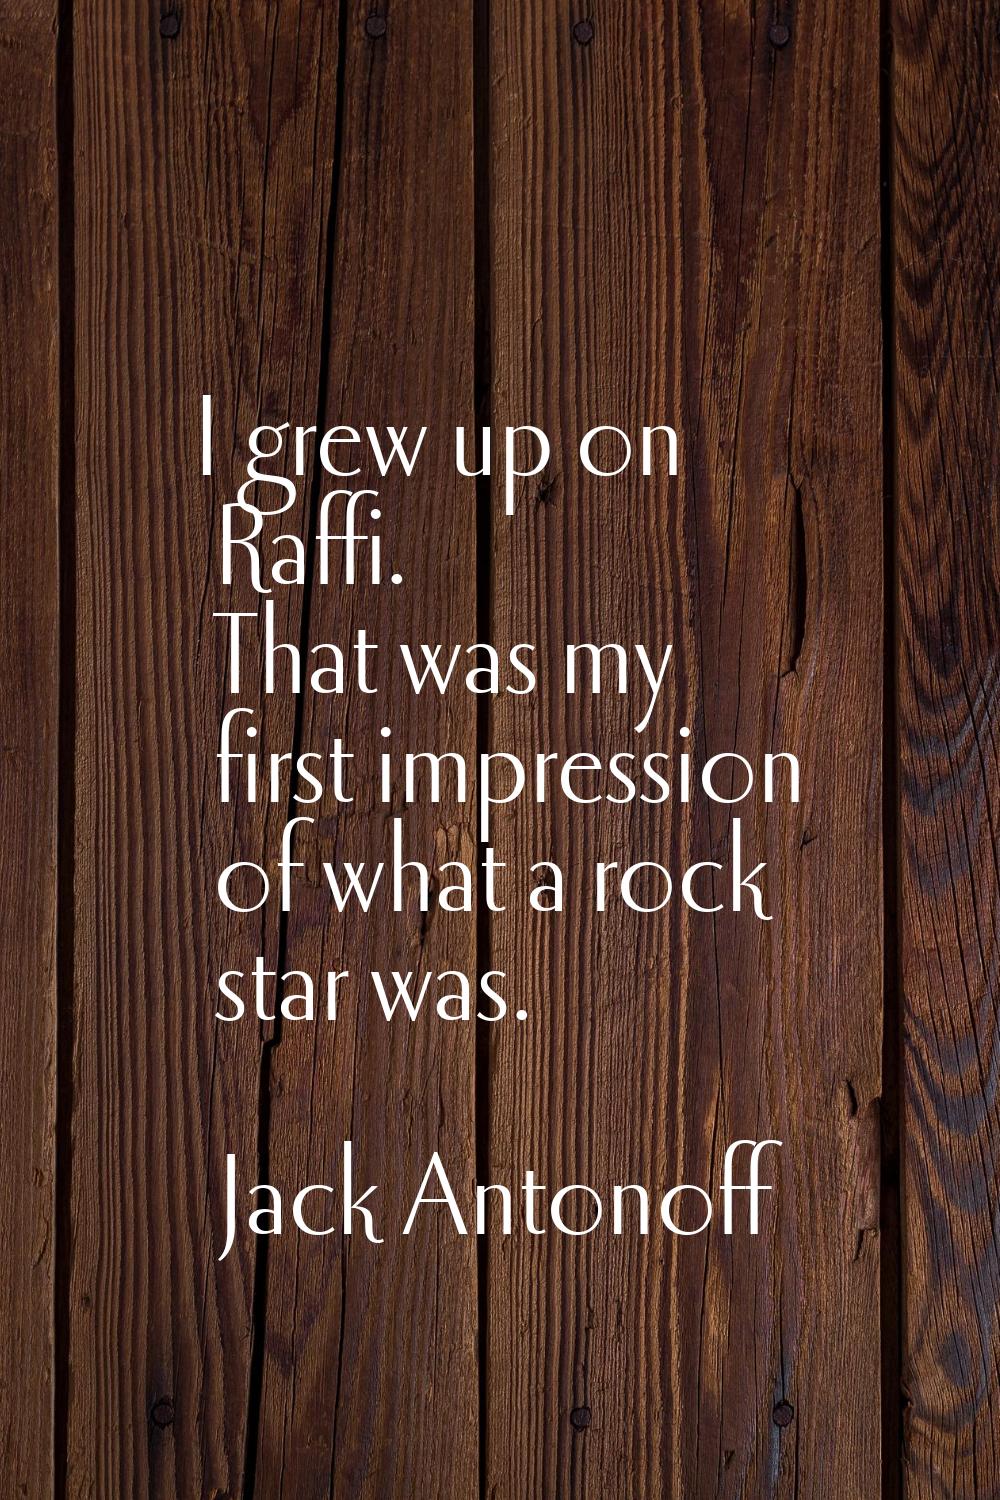 I grew up on Raffi. That was my first impression of what a rock star was.